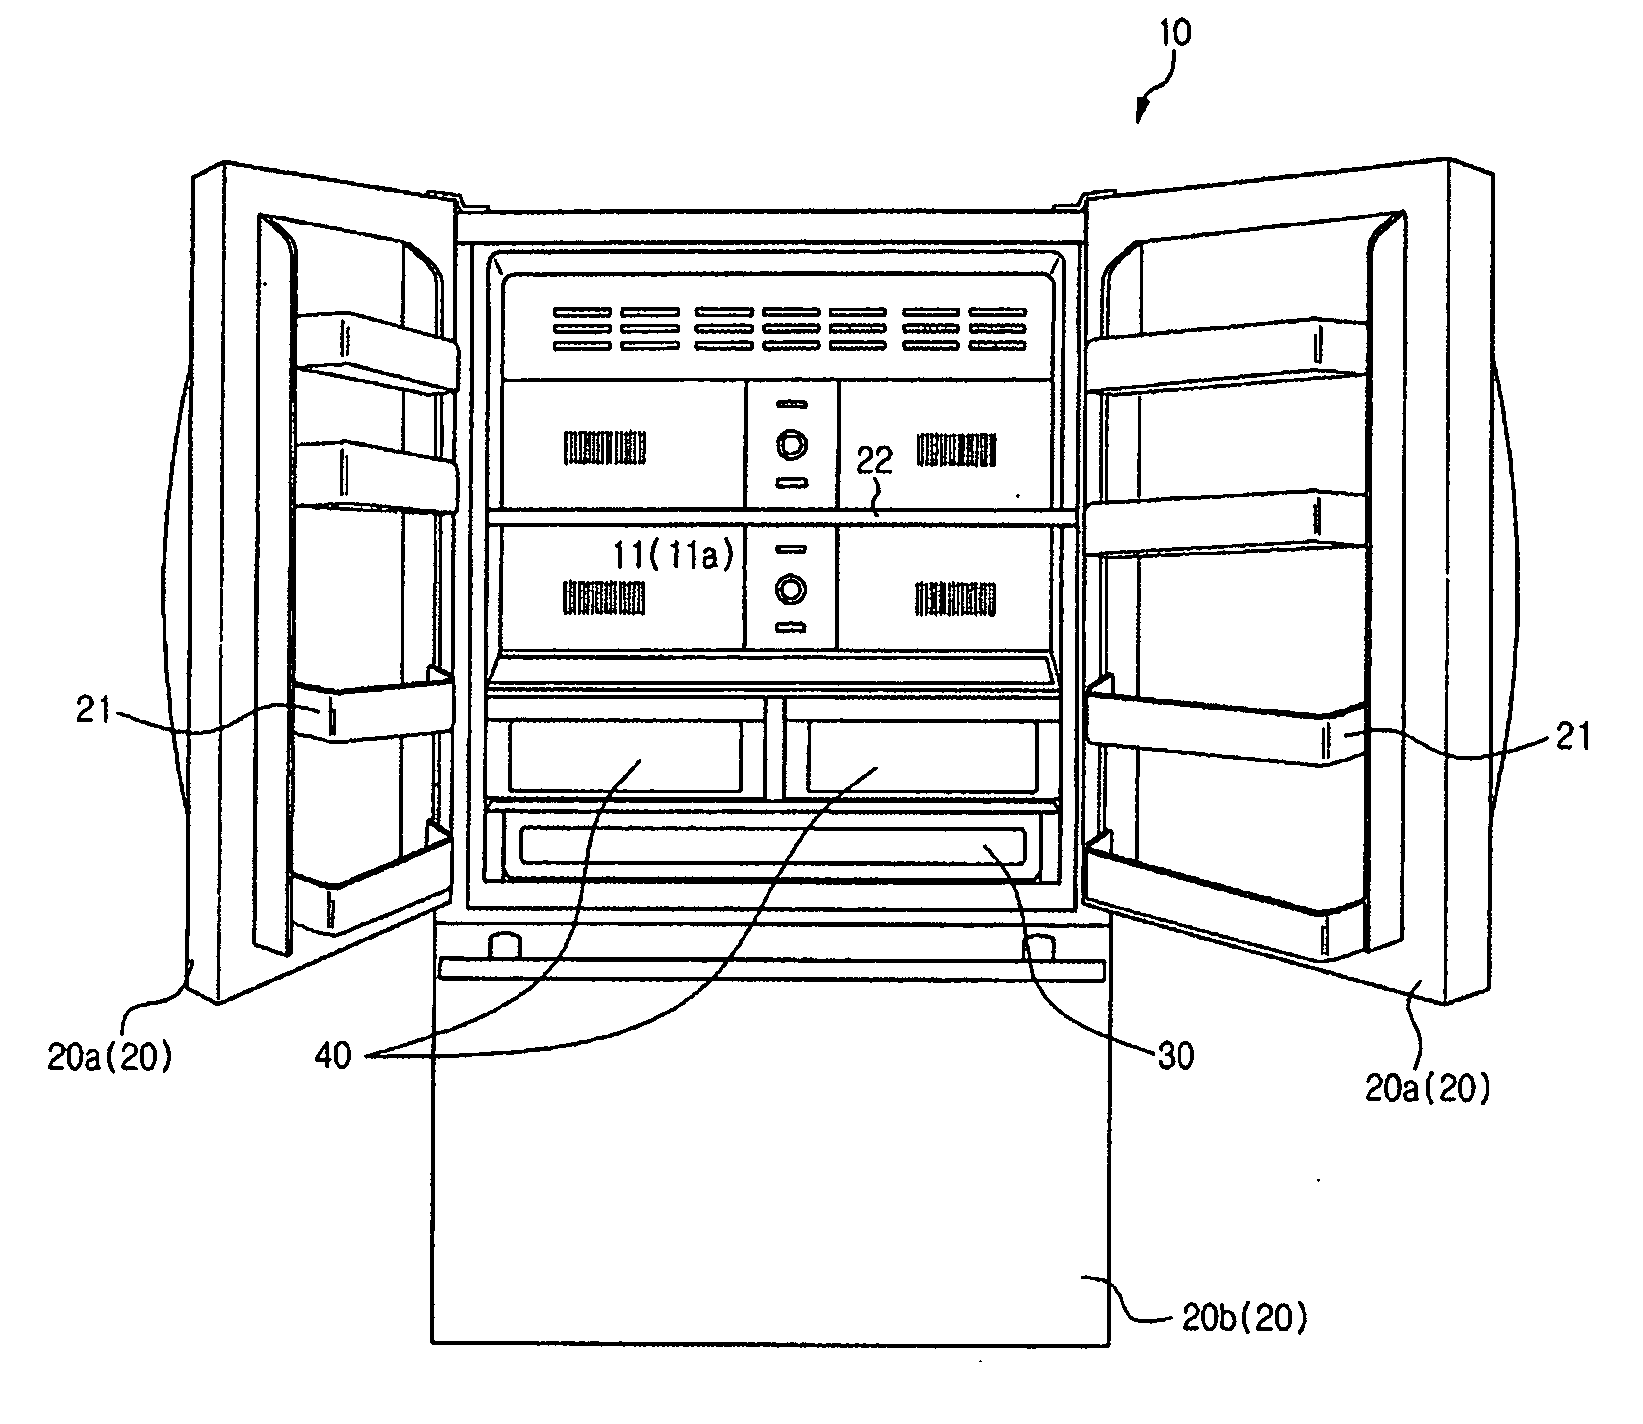 Refrigerator with receiving box